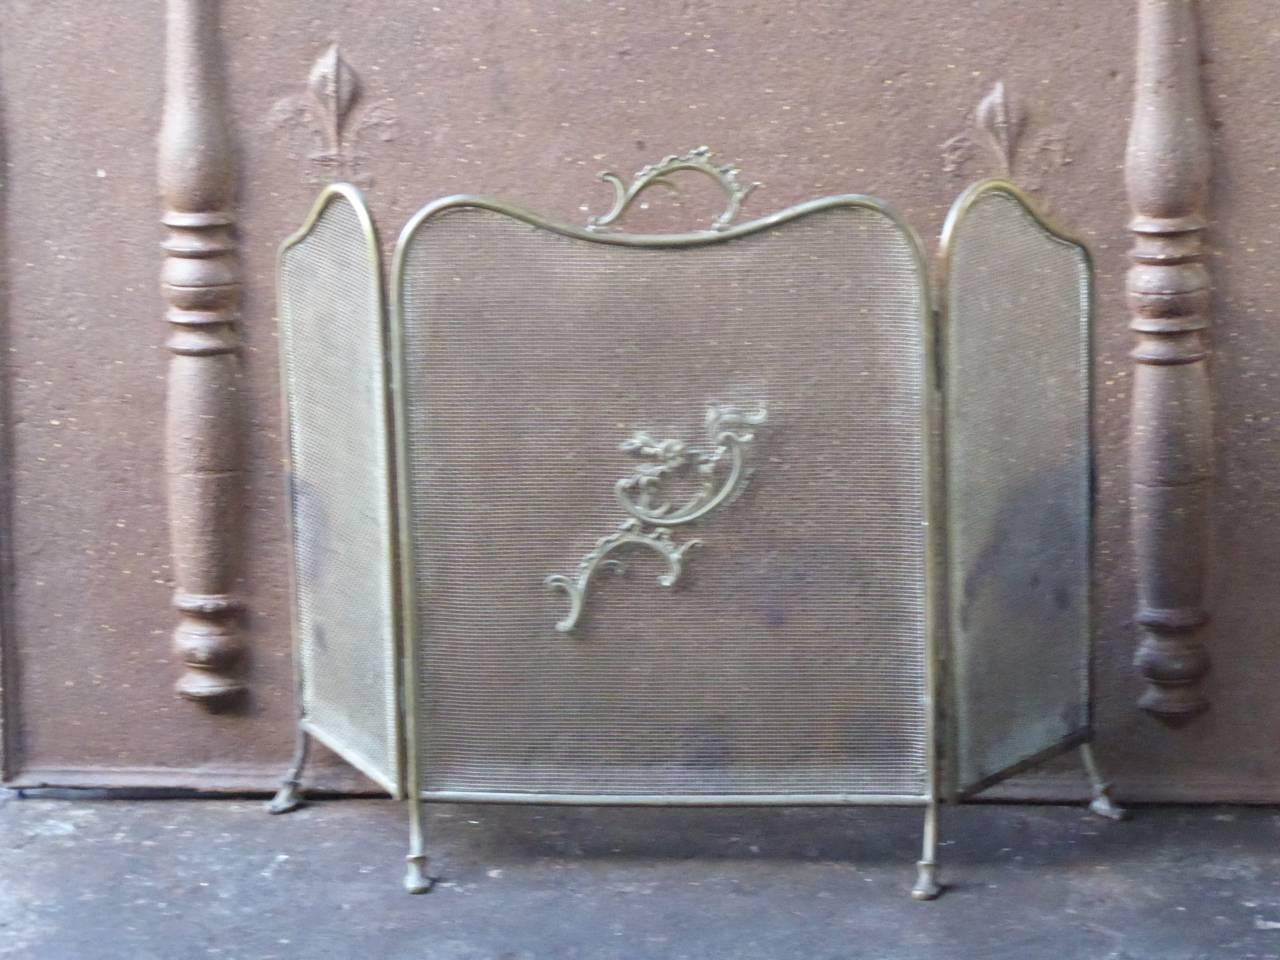 19th century English Victorian fireplace screen made of brass and iron mesh.

We have a unique and specialized collection of antique and used fireplace accessories consisting of more than 1000 listings at 1stdibs. Amongst others, we always have 300+